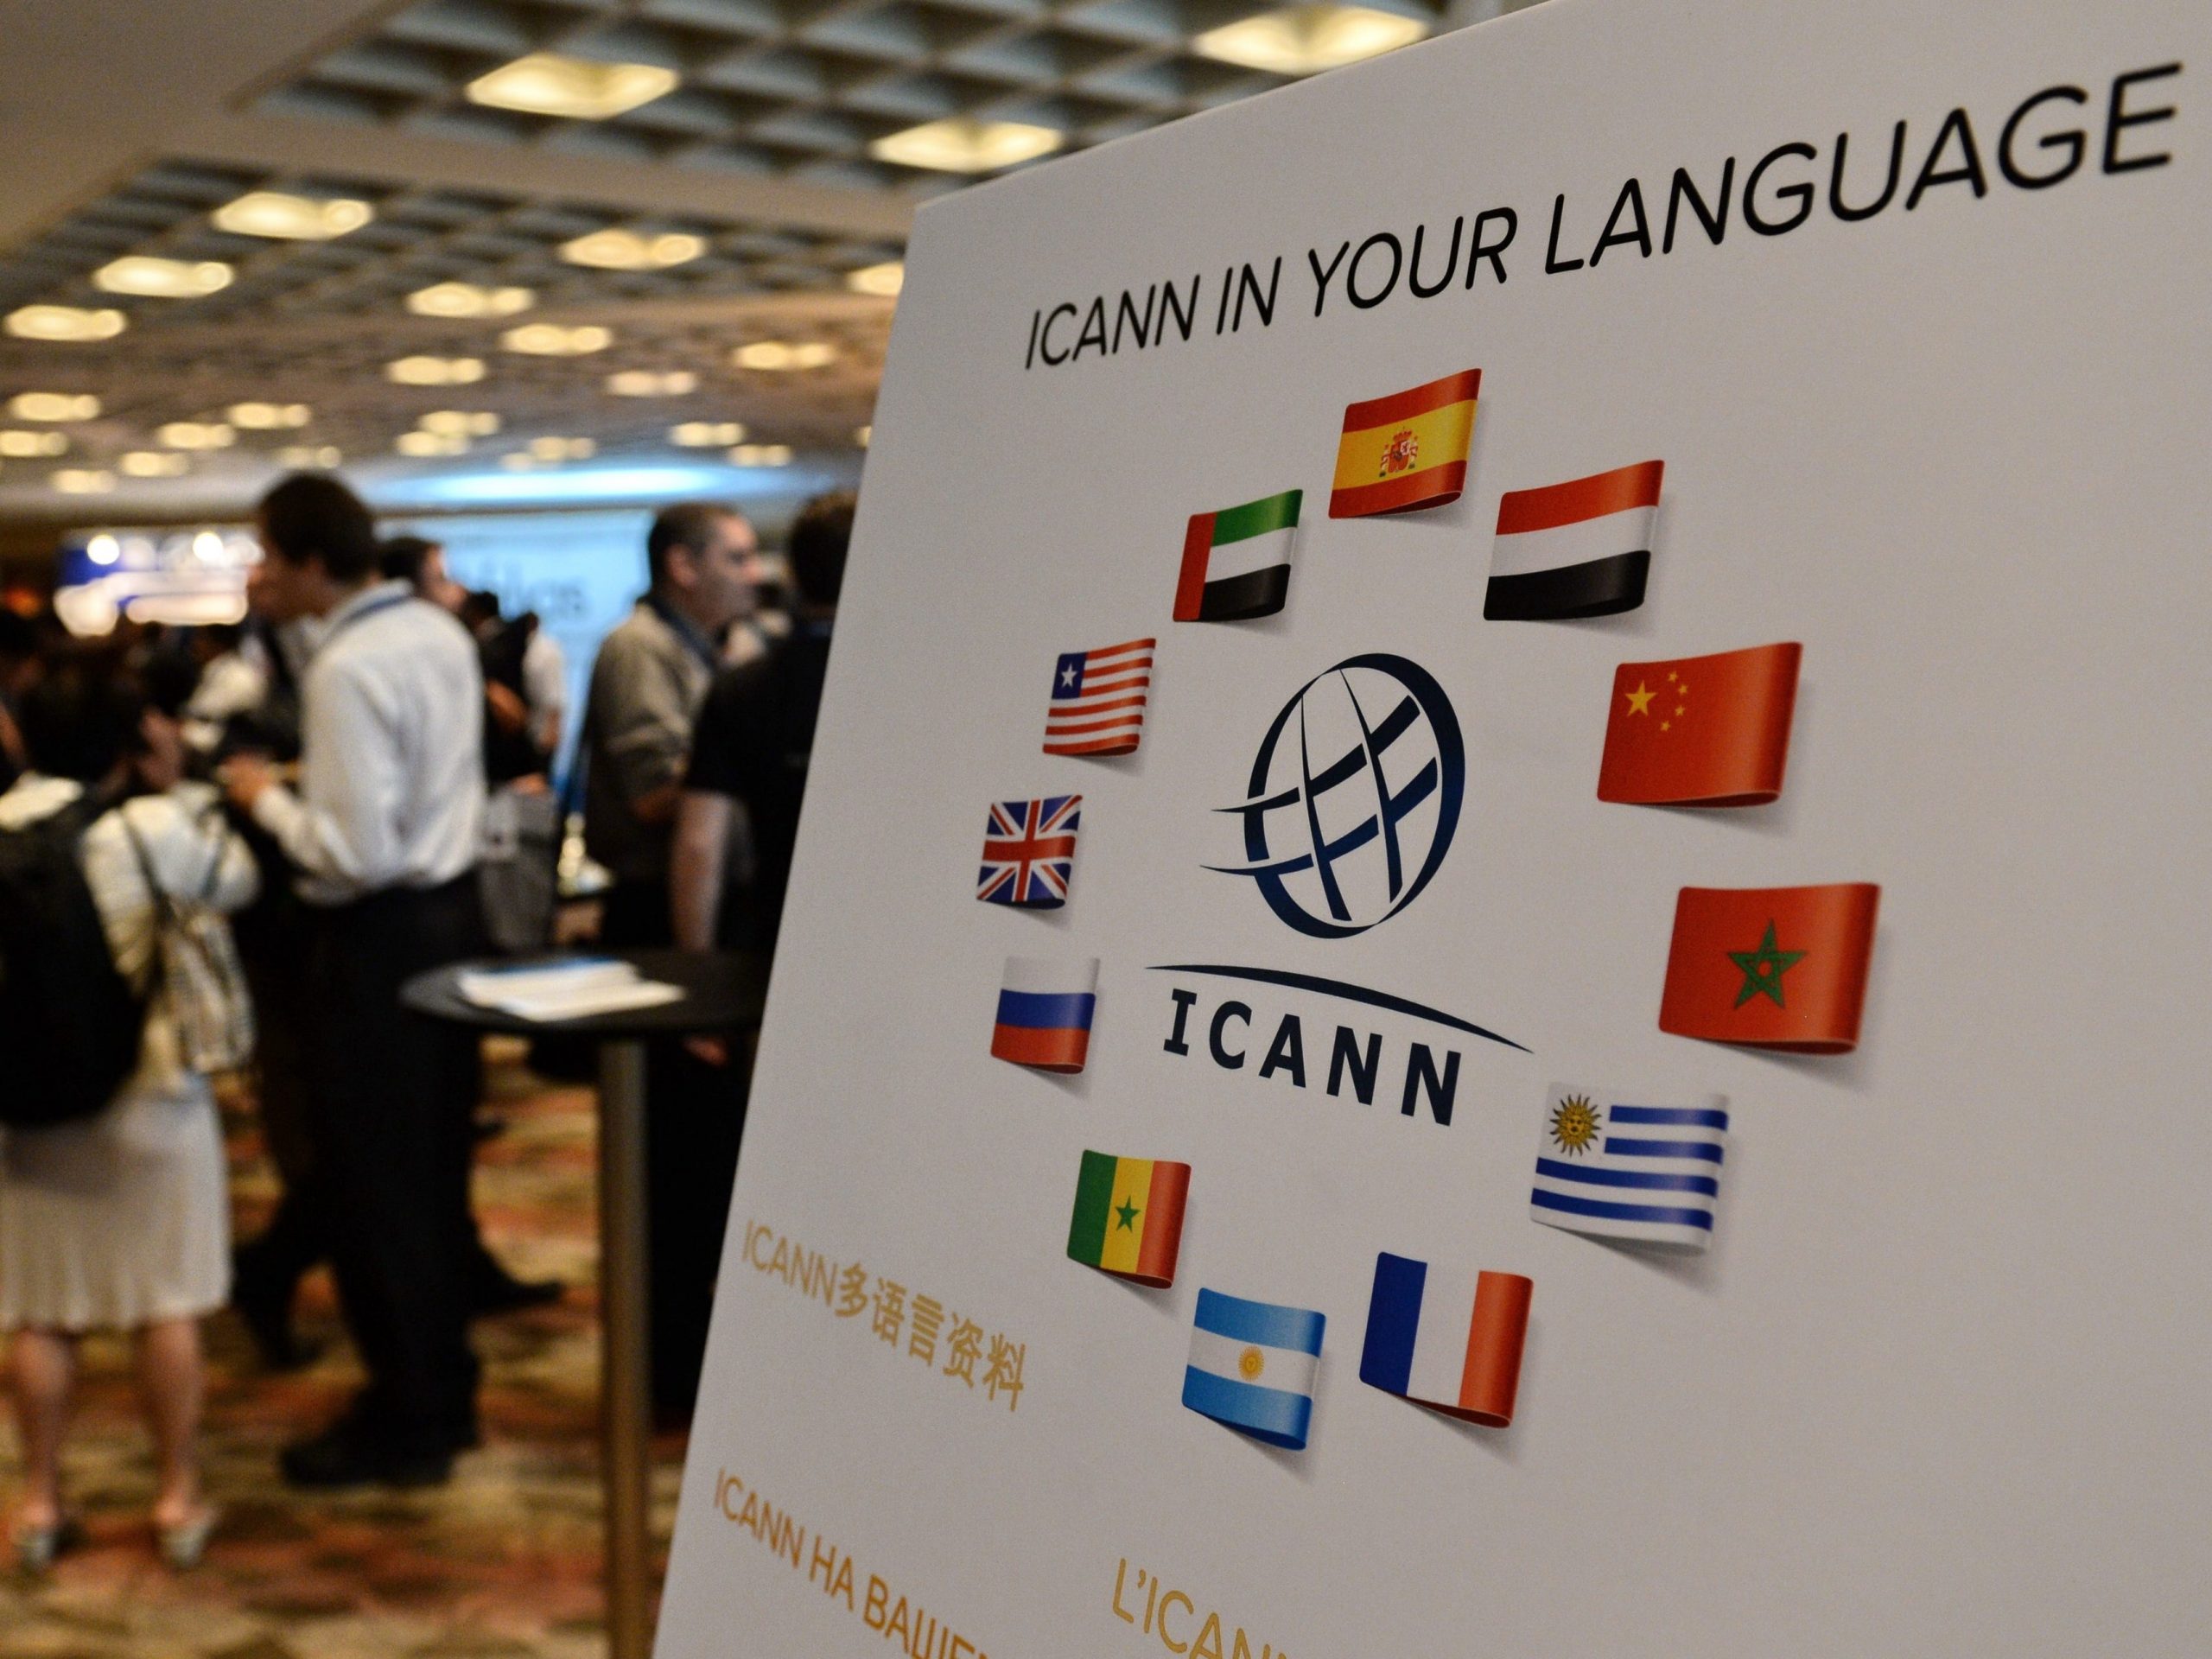 Ukraine has proposed to ICANN and RIPE NCC, two international internet organizations, to take down Russian domains and remove their root servers. Here, participants take a break at an ICANN meeting in Singapore meeting on March 24, 2014.